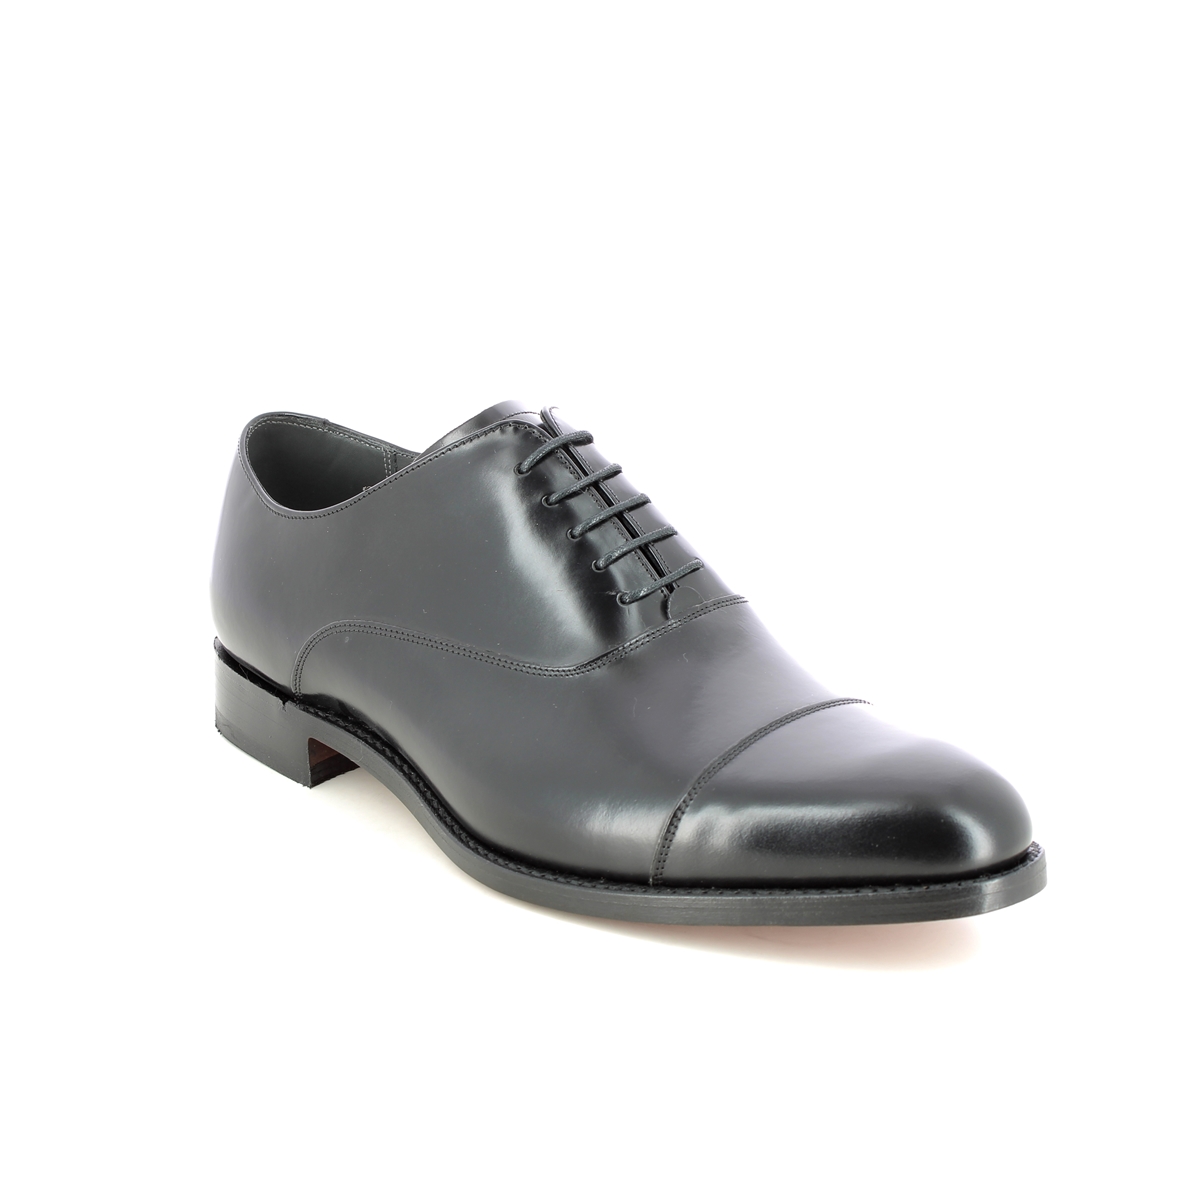 Barker Winsford Cap Black leather Mens formal shoes 3945-17G in a Plain Leather in Size 12